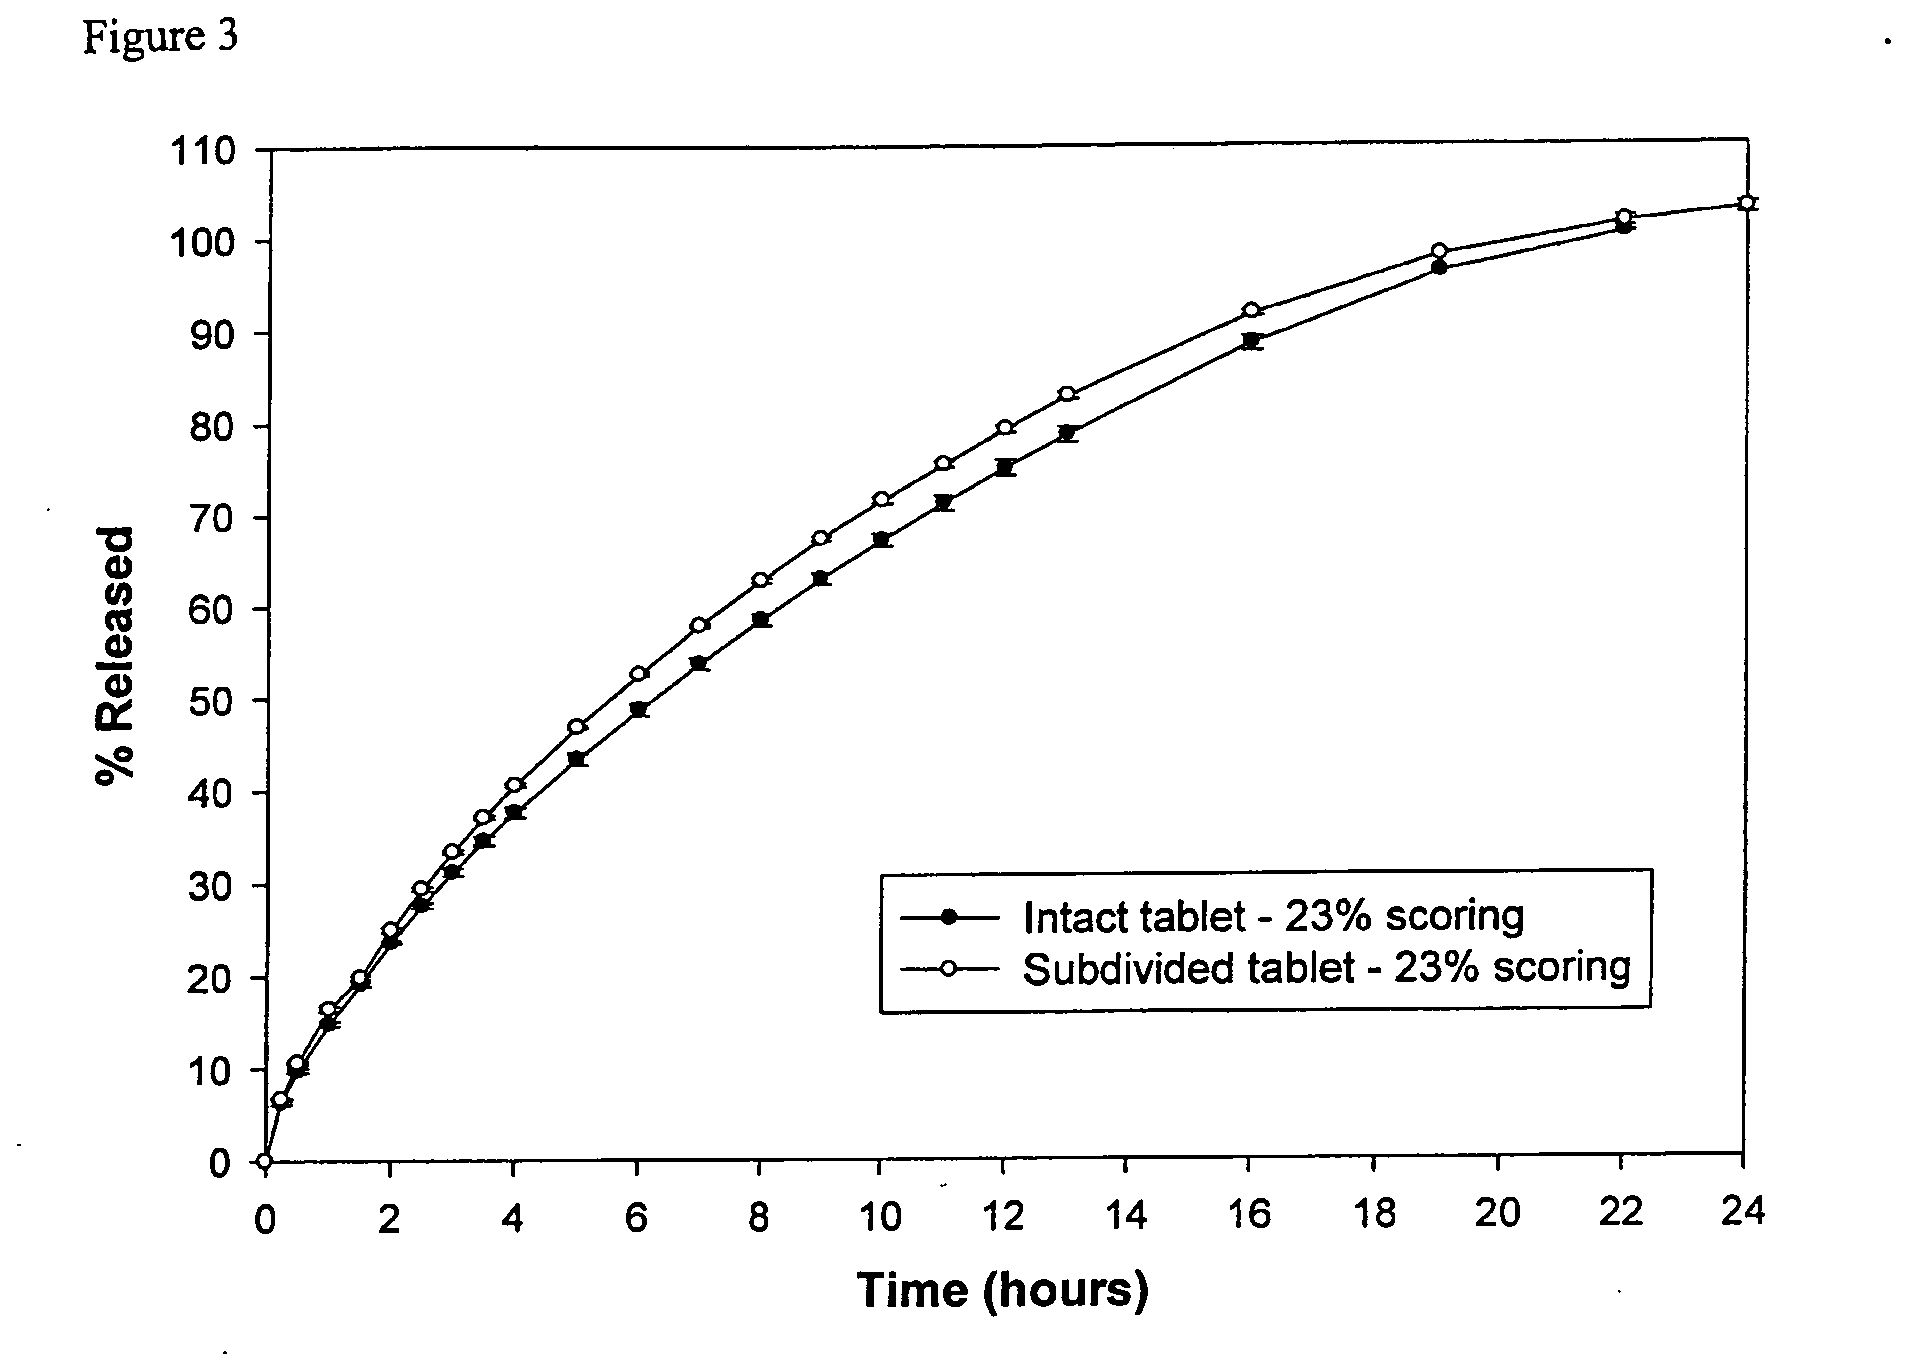 Sustained drug release compositions